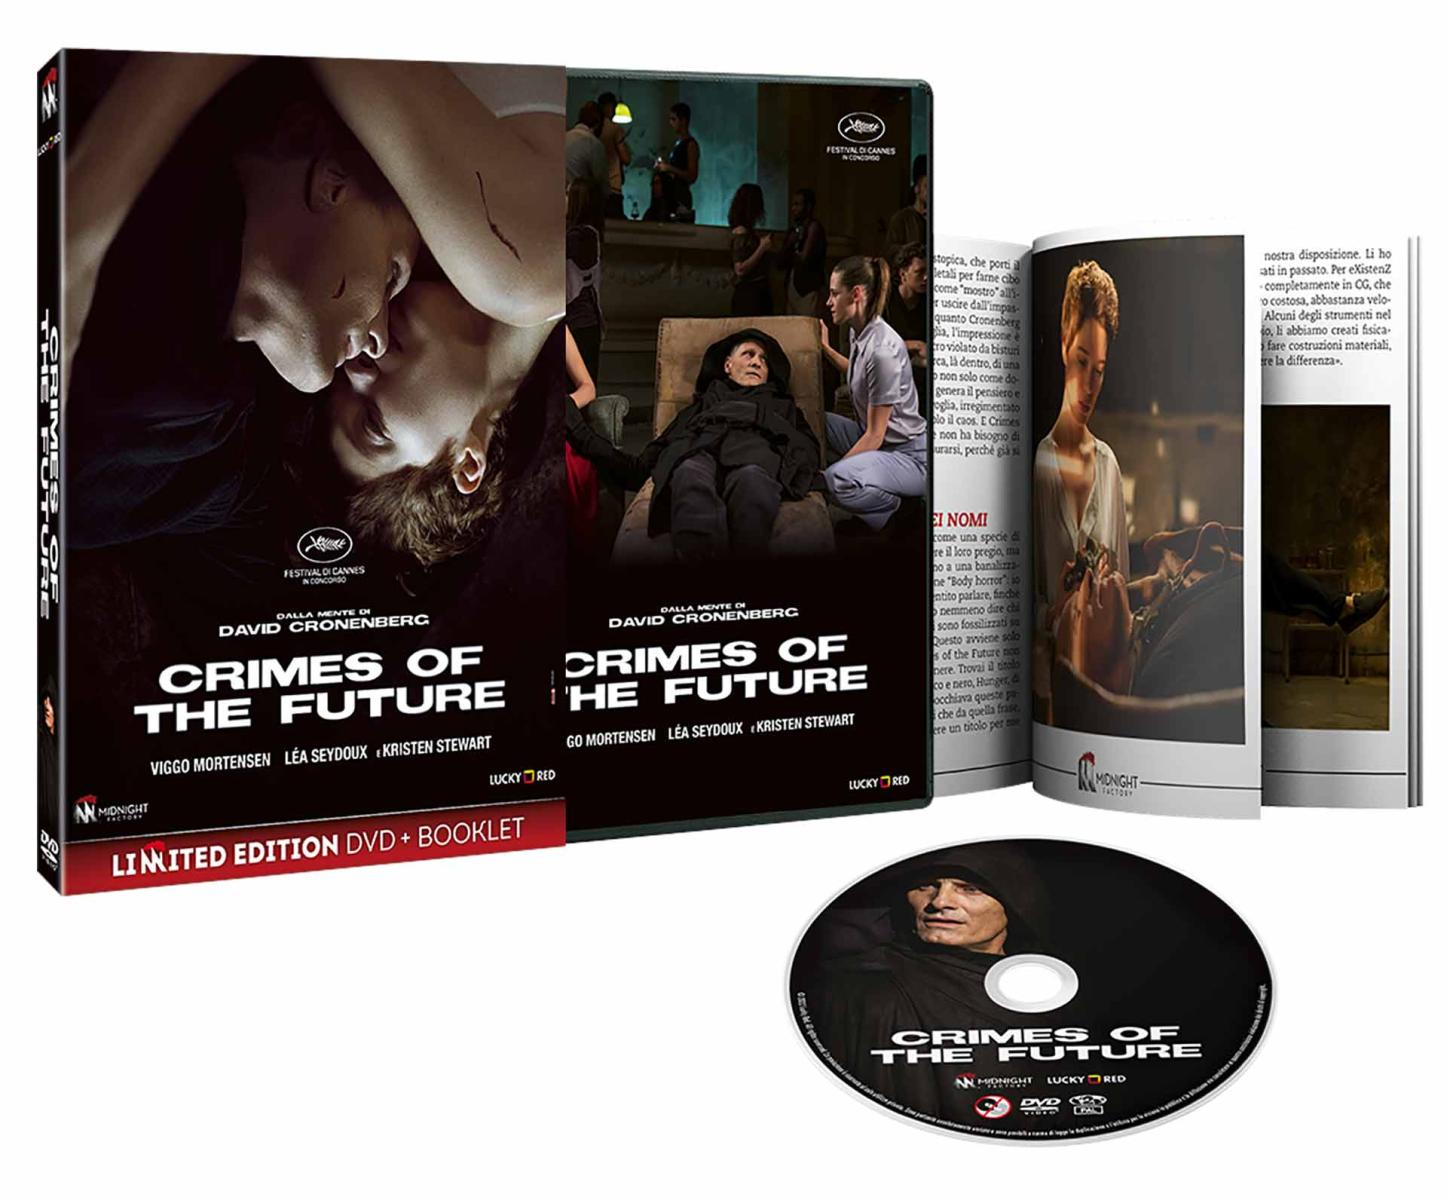 Crimes of the Future - Limited Edition DVD + Booklet (DVD) Thumbnail 2